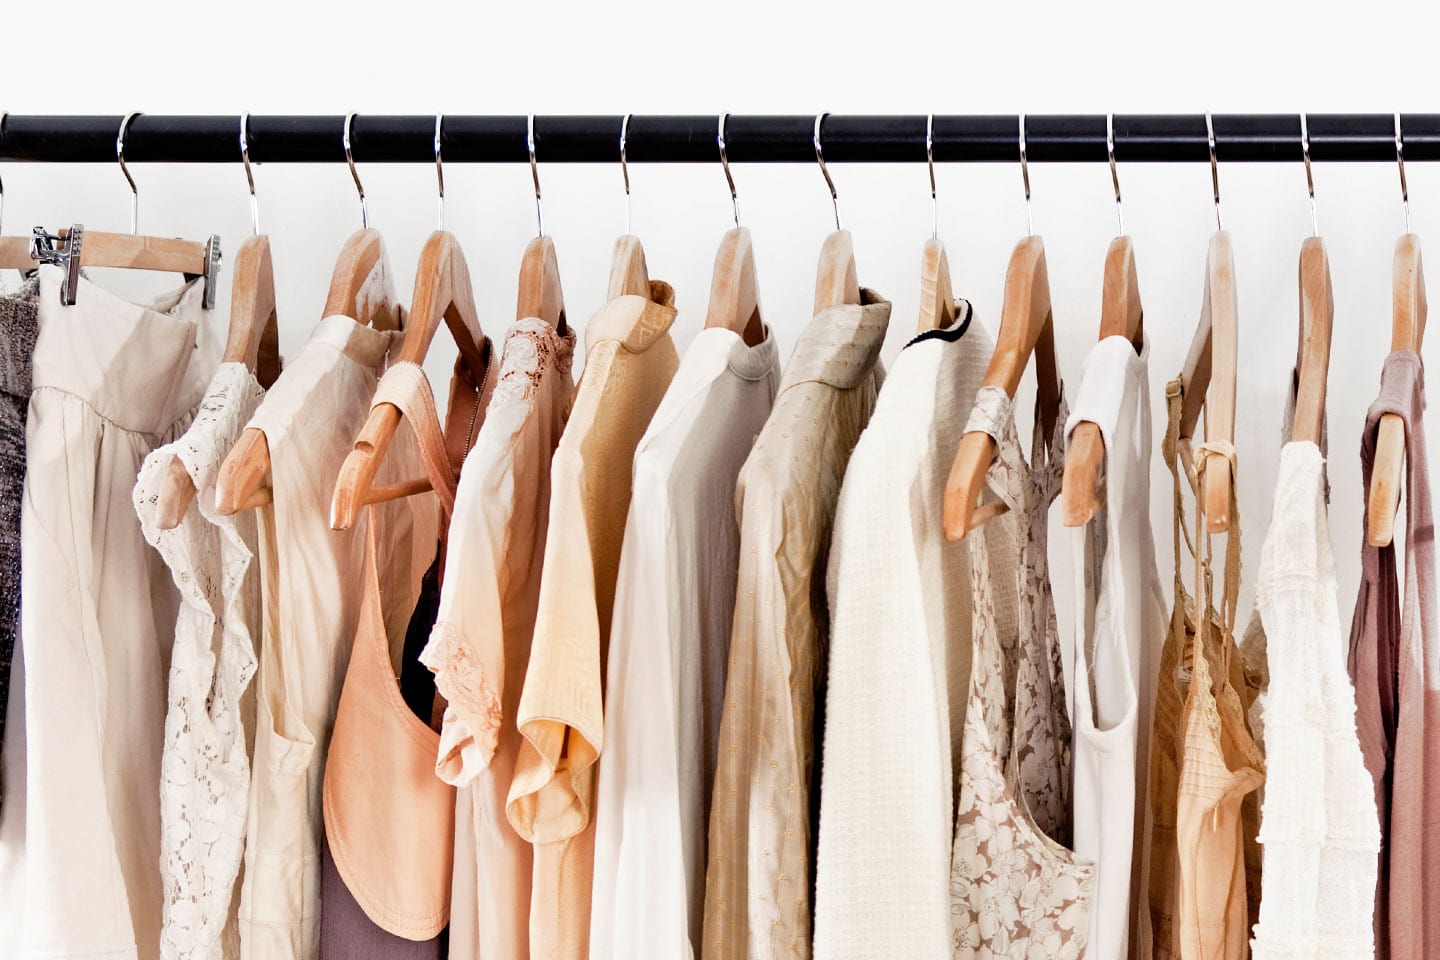 women's tops and blouses hanging on a rack in chattanooga